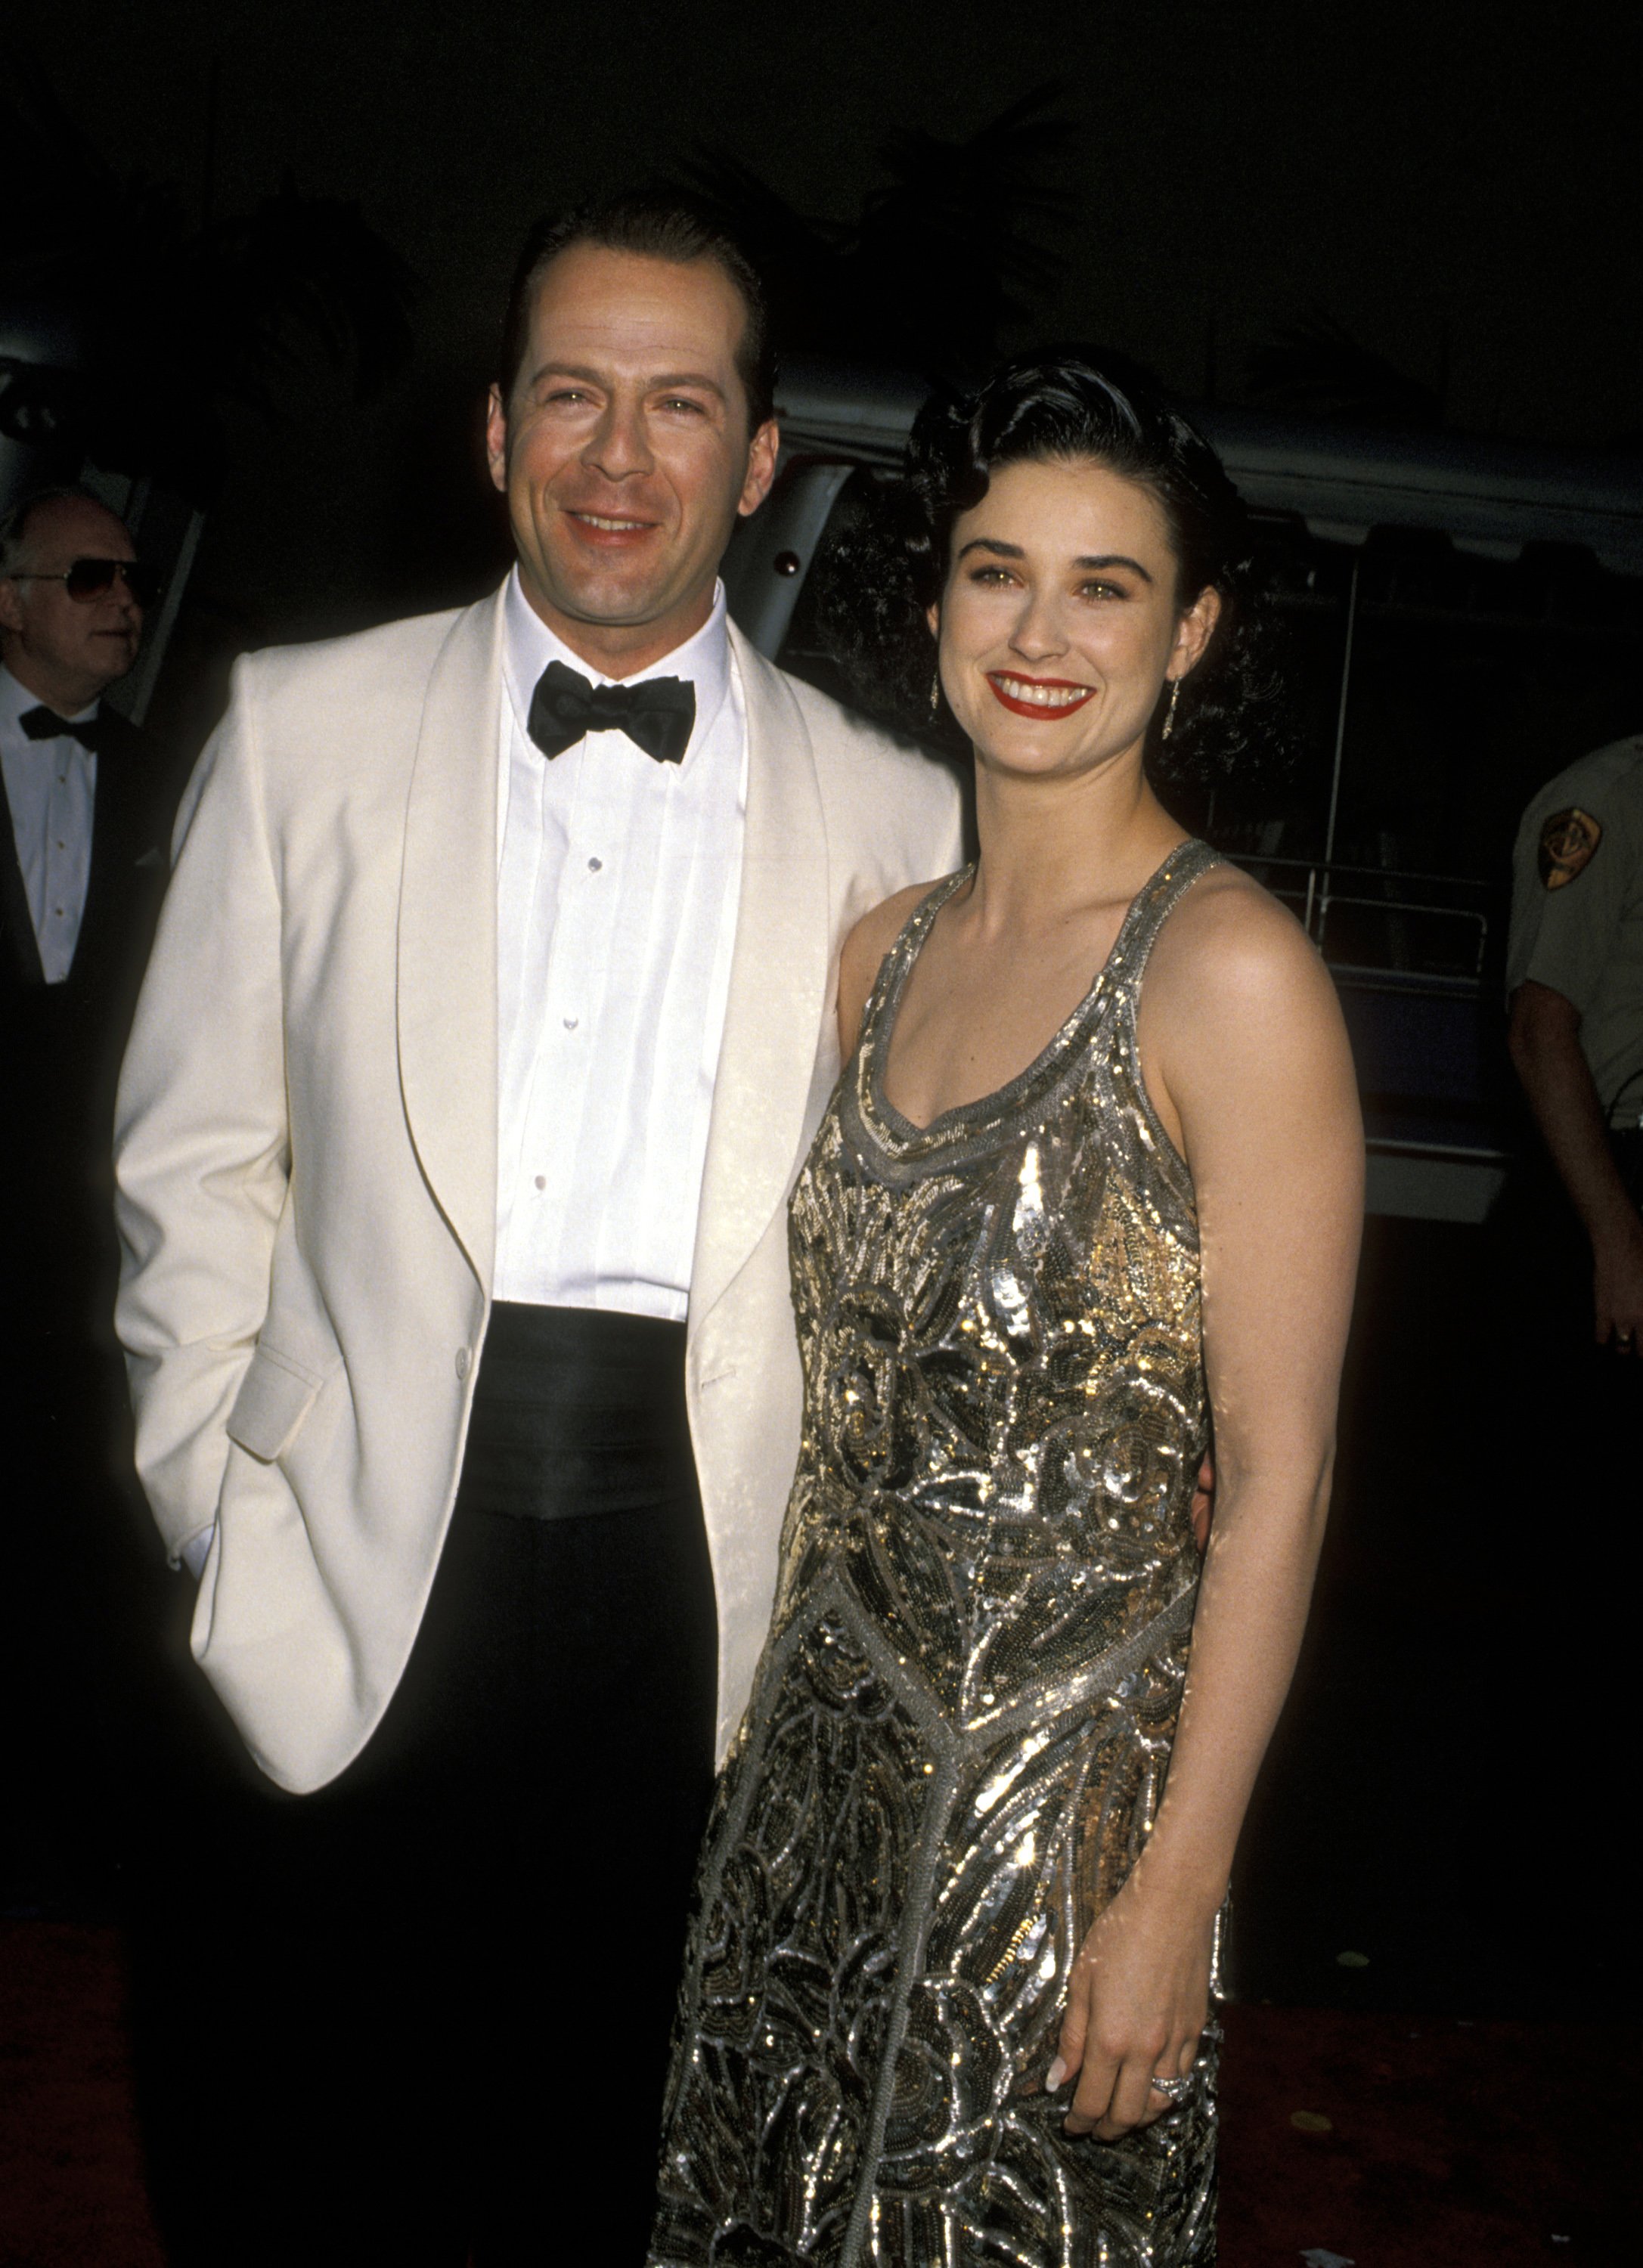 Bruce Willis and Demi Moore in Burbank, California, on June 2, 1990 | Source: Getty Images